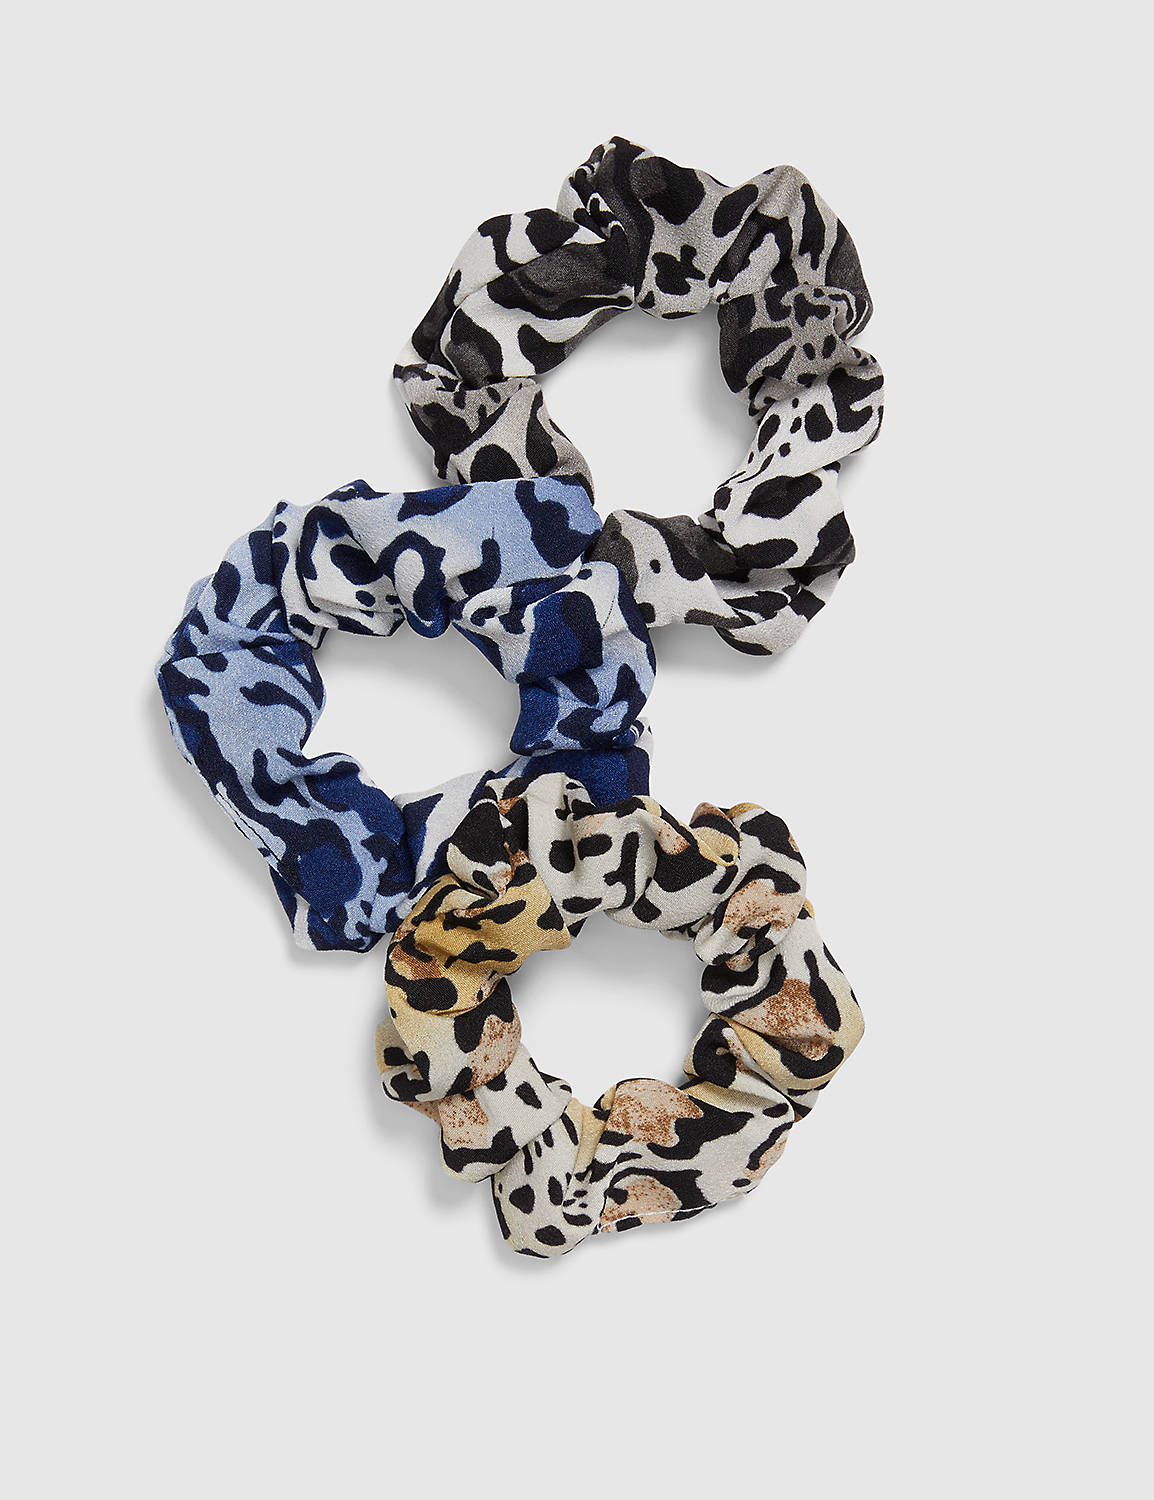 MIXED LEOPARD SCRUNCHIE 3 PACK:LBF21084SnowLeopard_C1:ONESZ Product Image 1